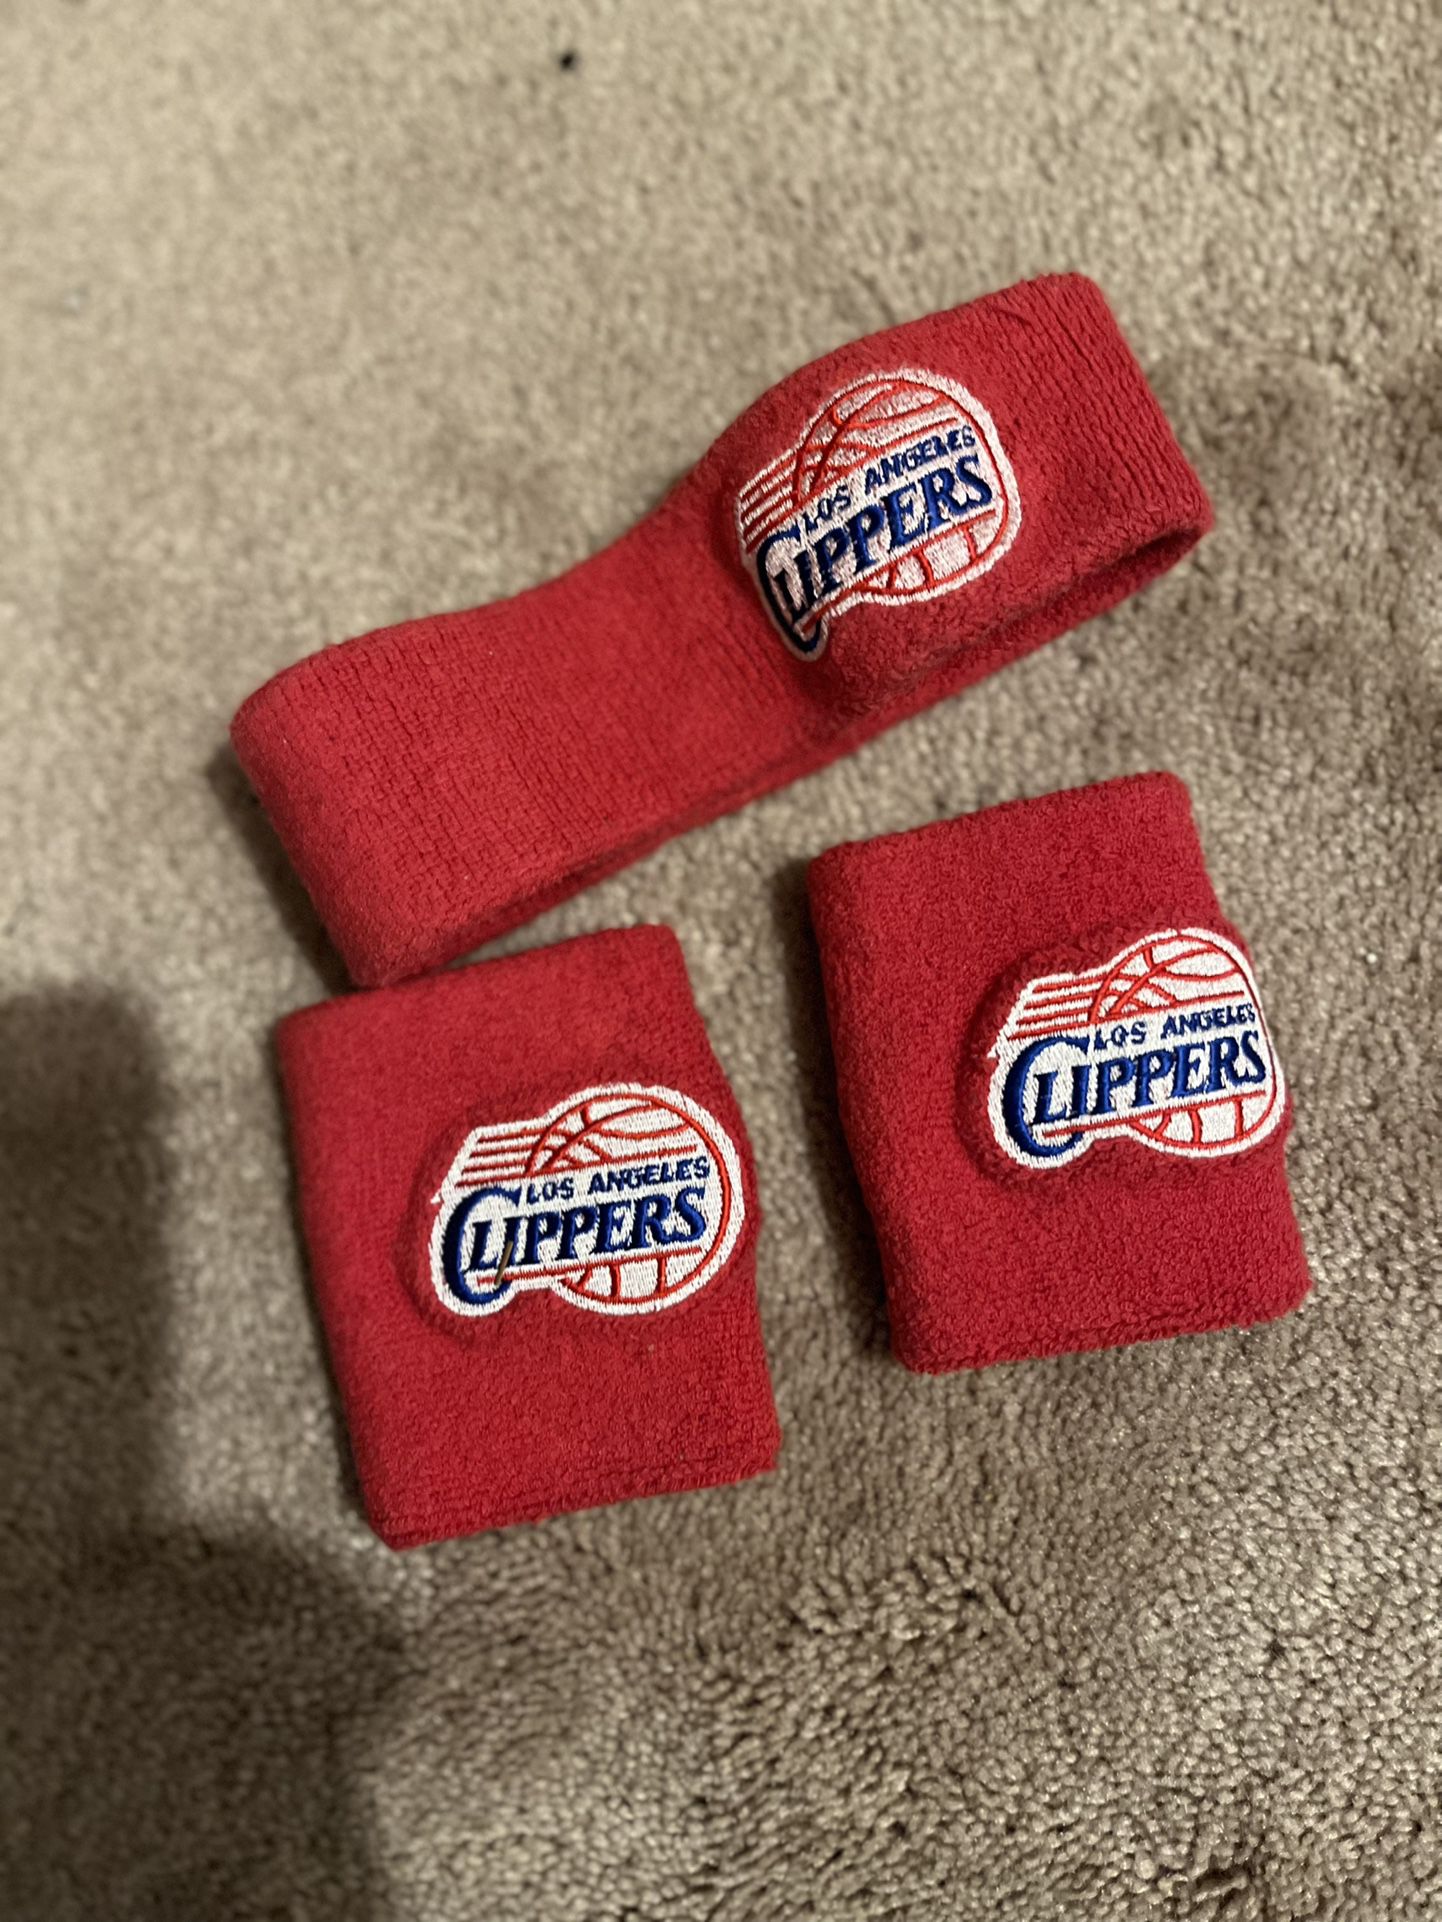 Los Angeles Clippers Nba Headband And Wristband